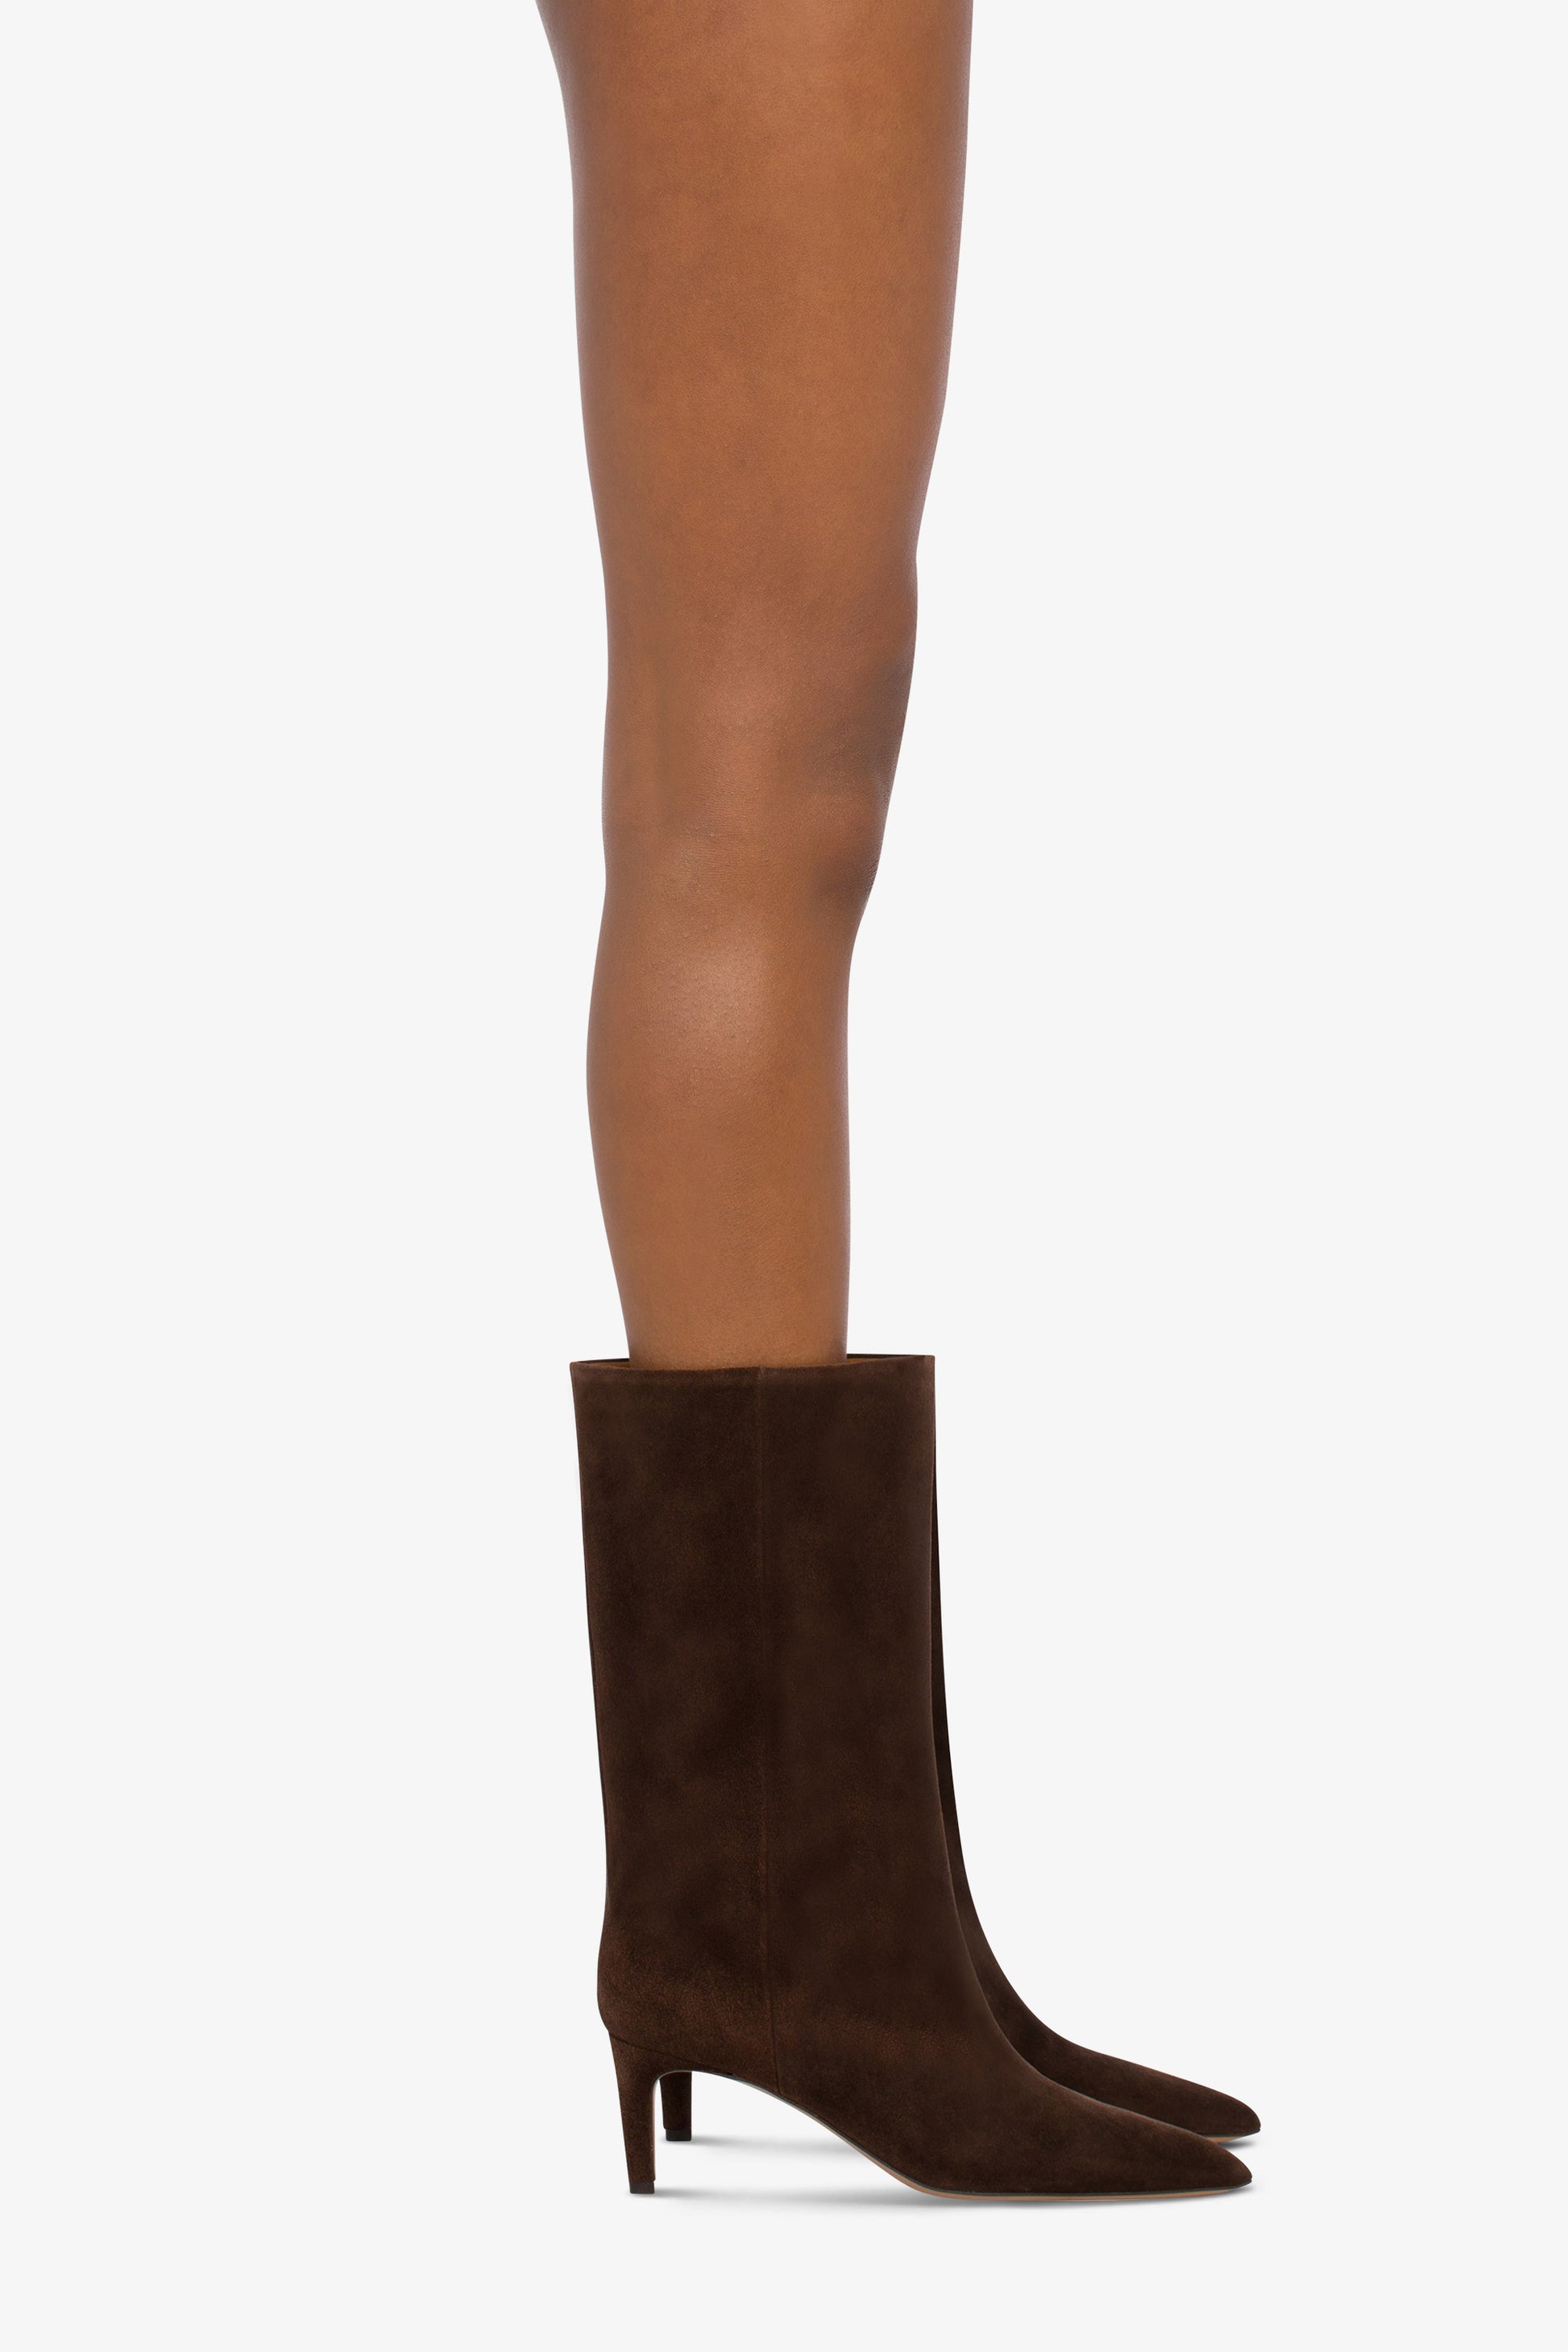 Calf-high boots in smooth pepper suede leather - Produit porté